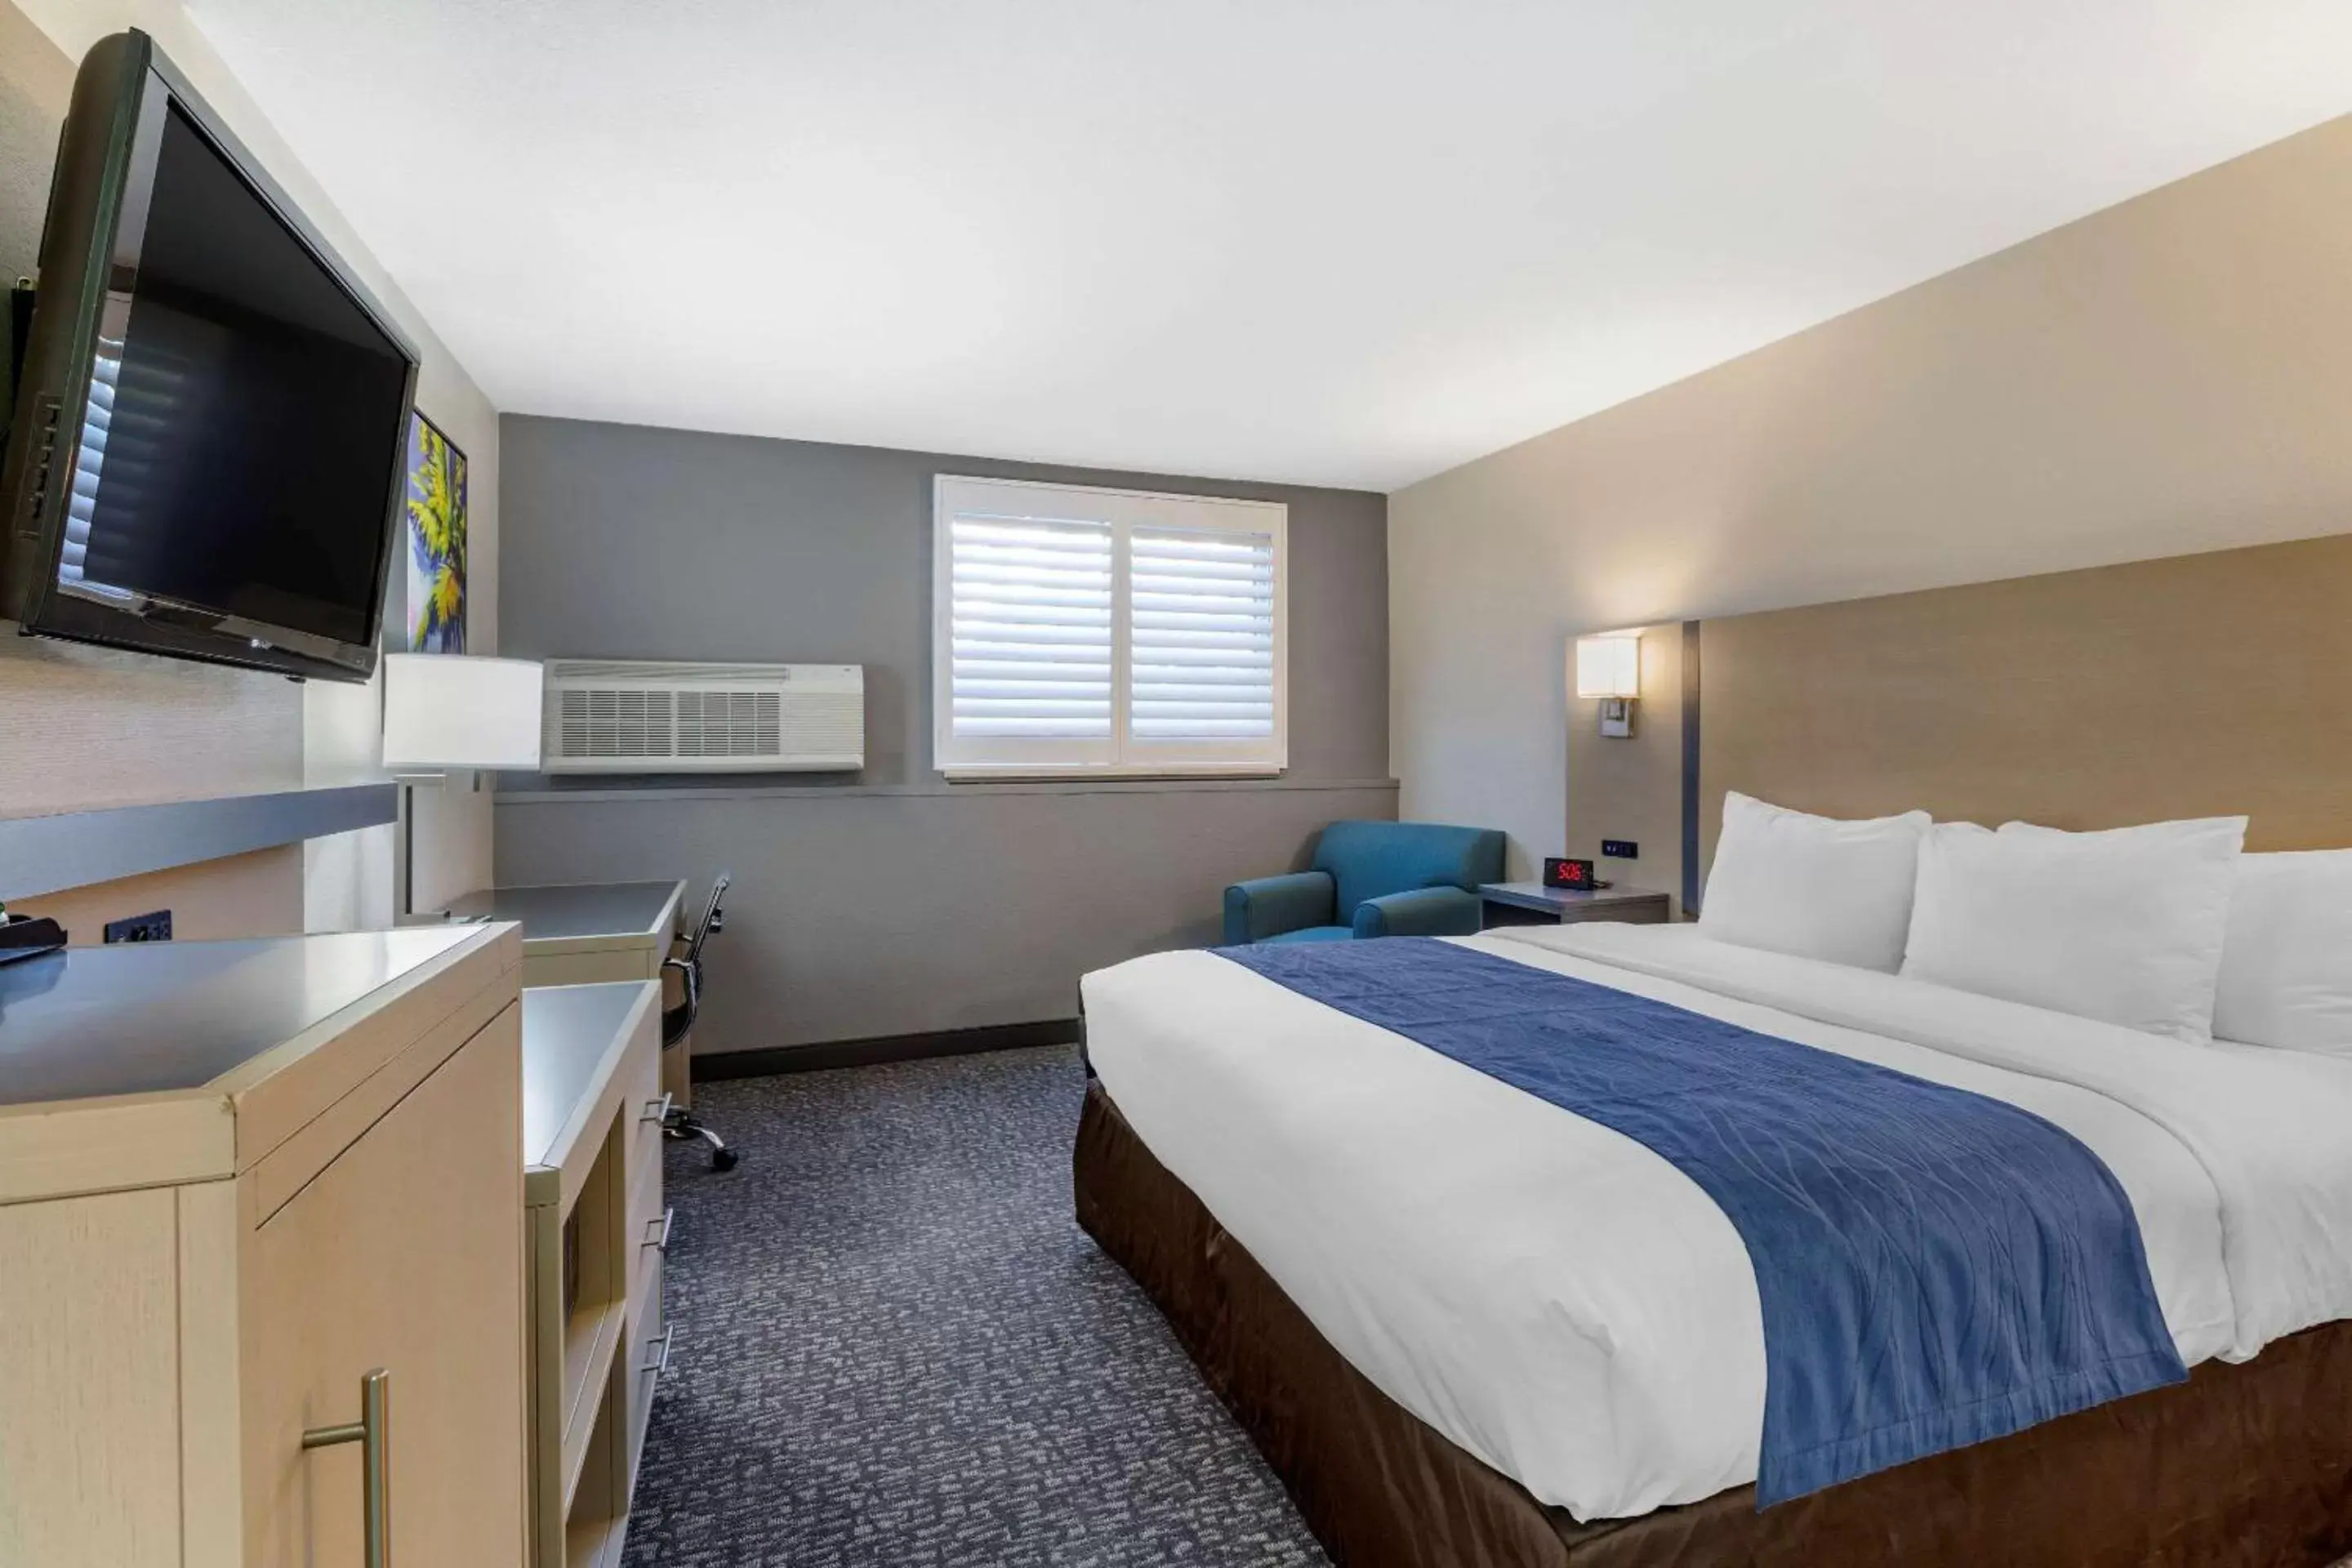 Accessible Room, 1 King Bed, Transfer Shower, Non Smoking in Comfort Inn San Diego Miramar